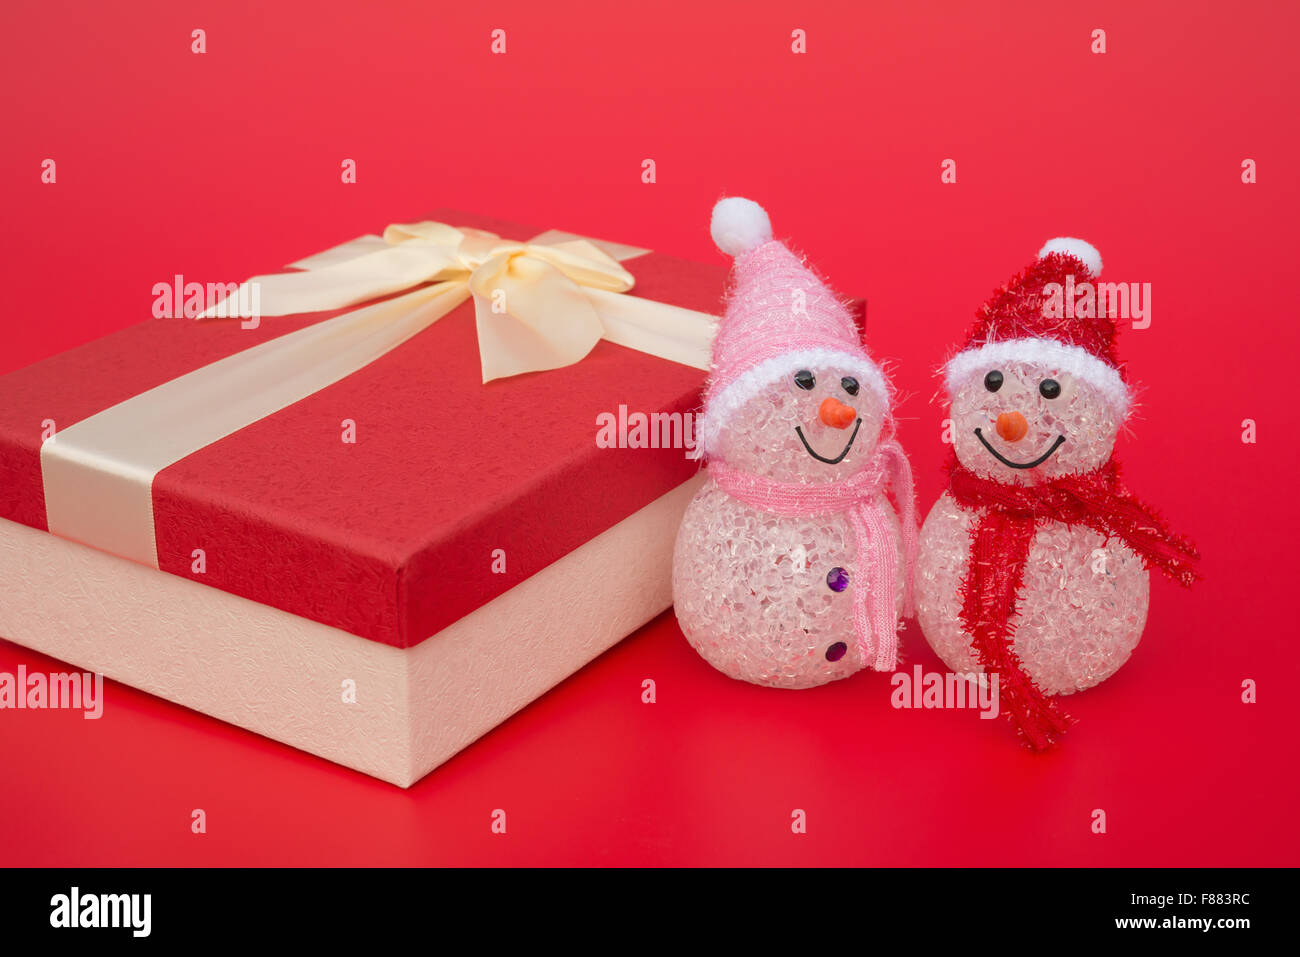 two smiling toy christmas snowman and a present box on red background Stock Photo